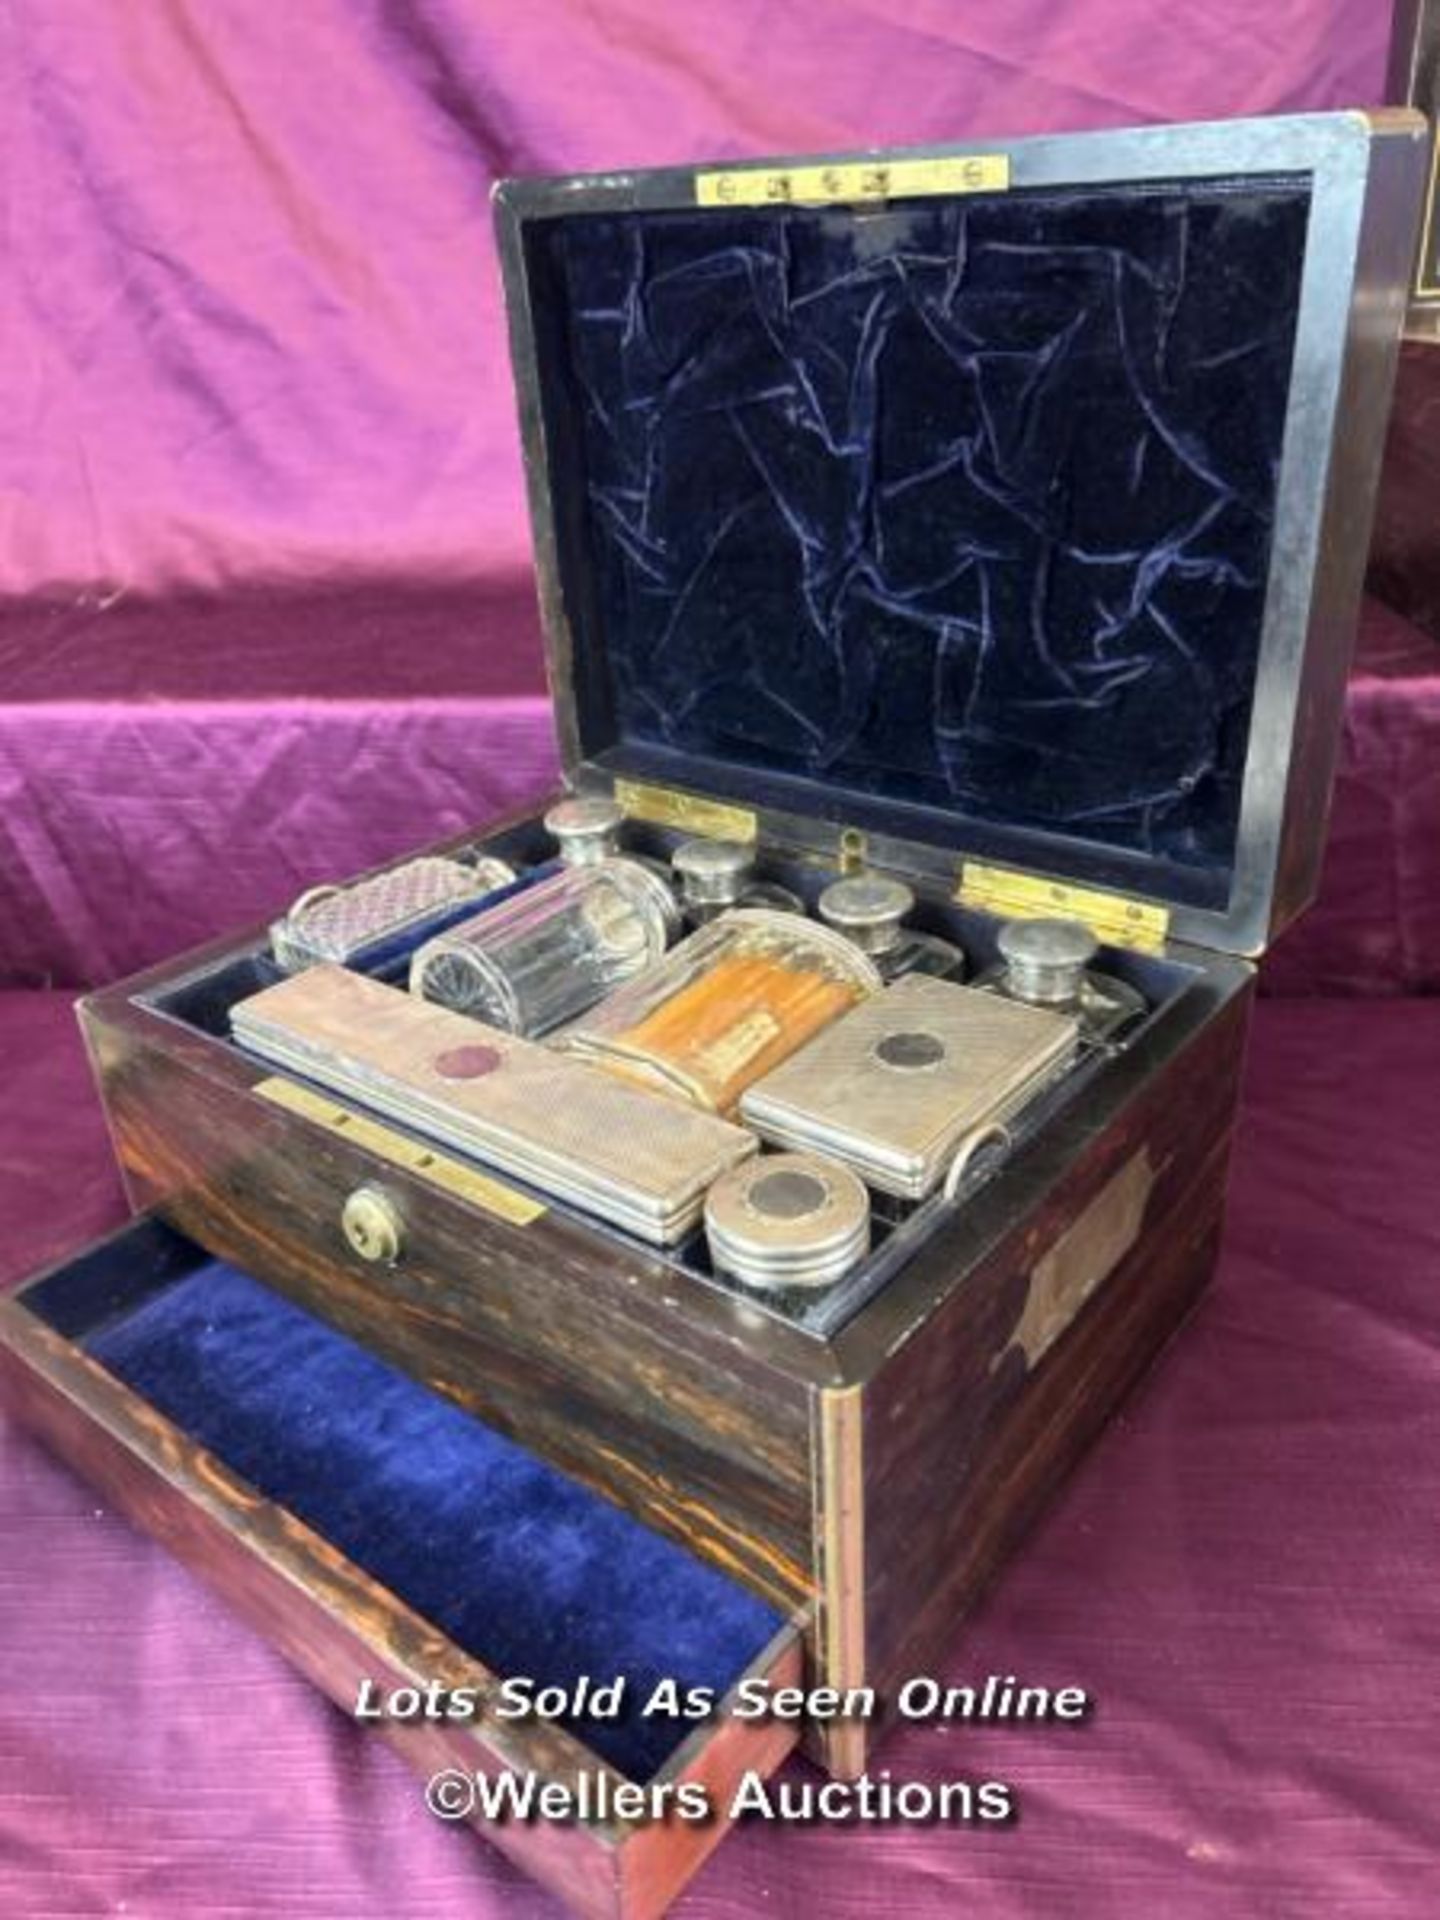 EARLY 19TH CENTURY GENTLEMAN'S VANITY BOX CONTAINING STERLING SILVER AND GLASS CONTAINERS (ONE